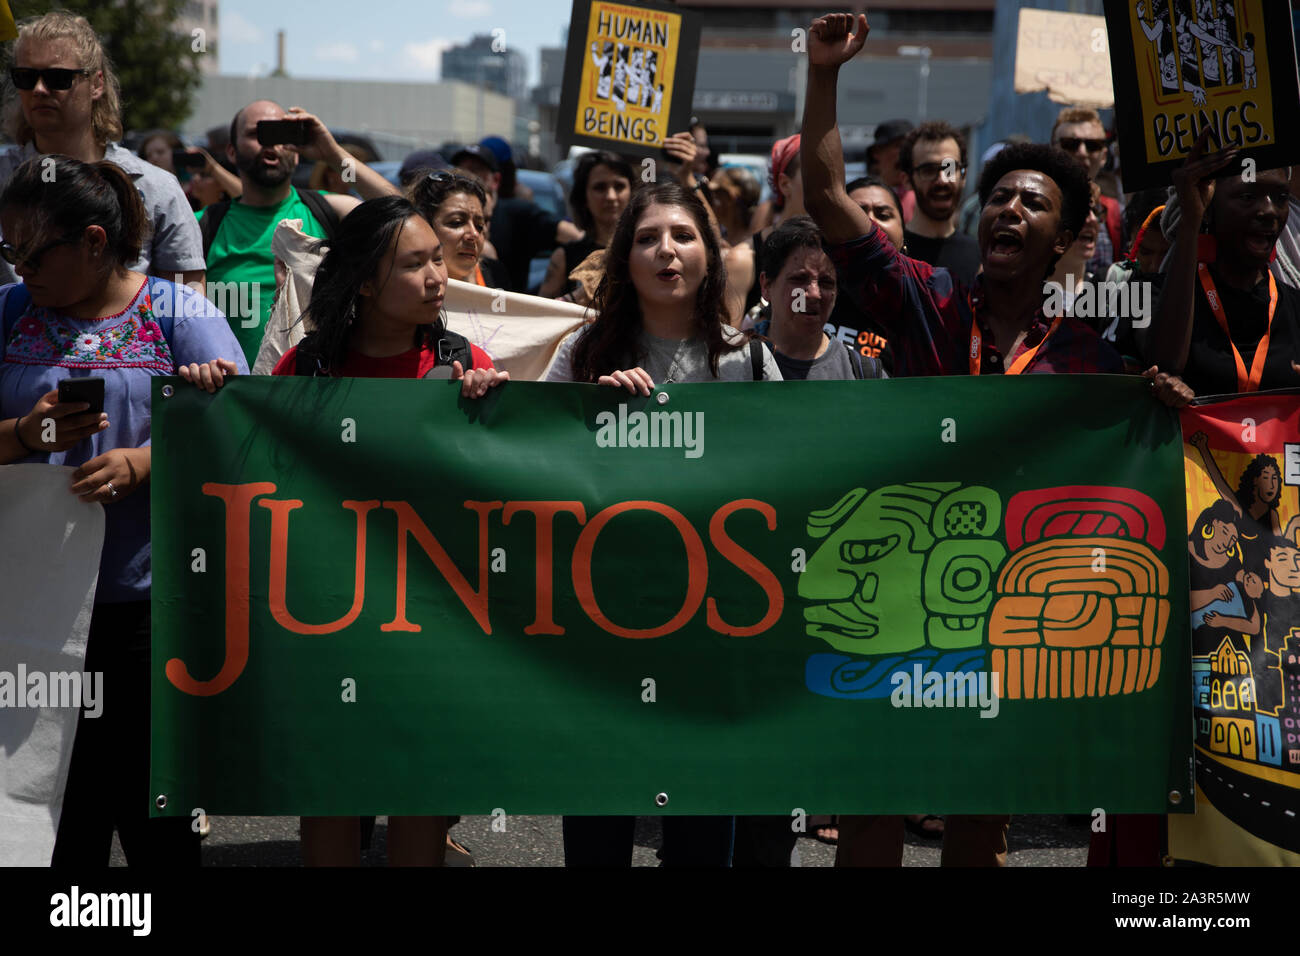 Philadelphia, PA/USA - July 12, 2019: Activists in Philadelphia march on immigration and customs enforcement as part of a nationwide day of action in protest of conditions at migrant detention centers Stock Photo